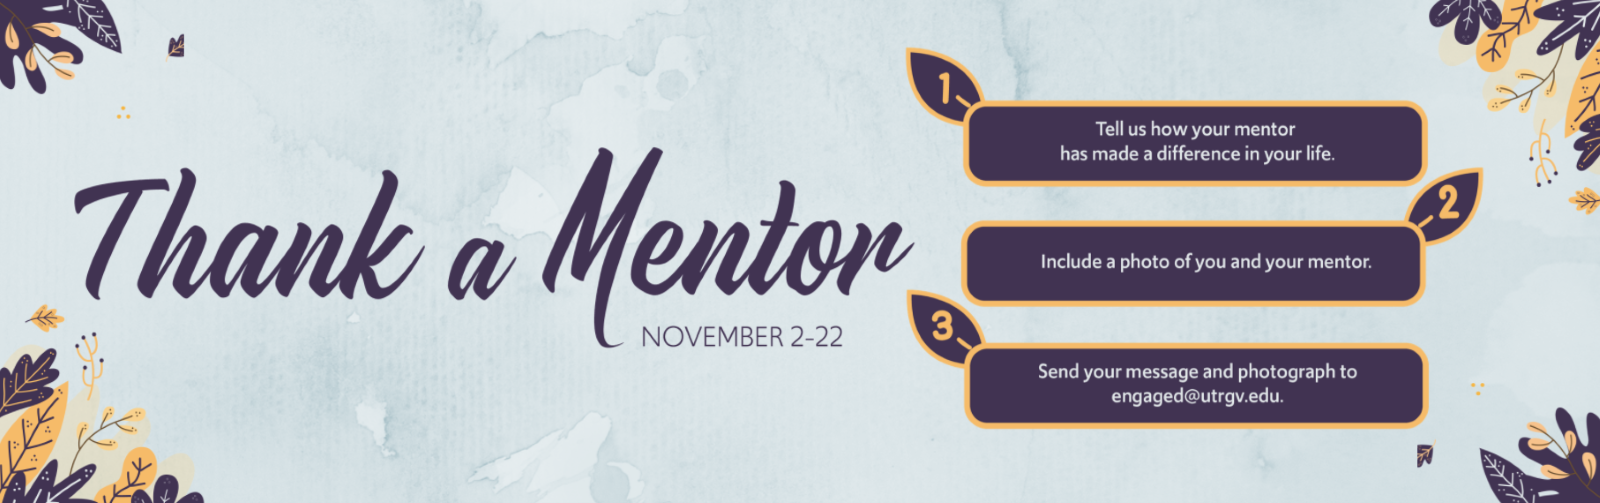 Thank-a-Mentor Campaign